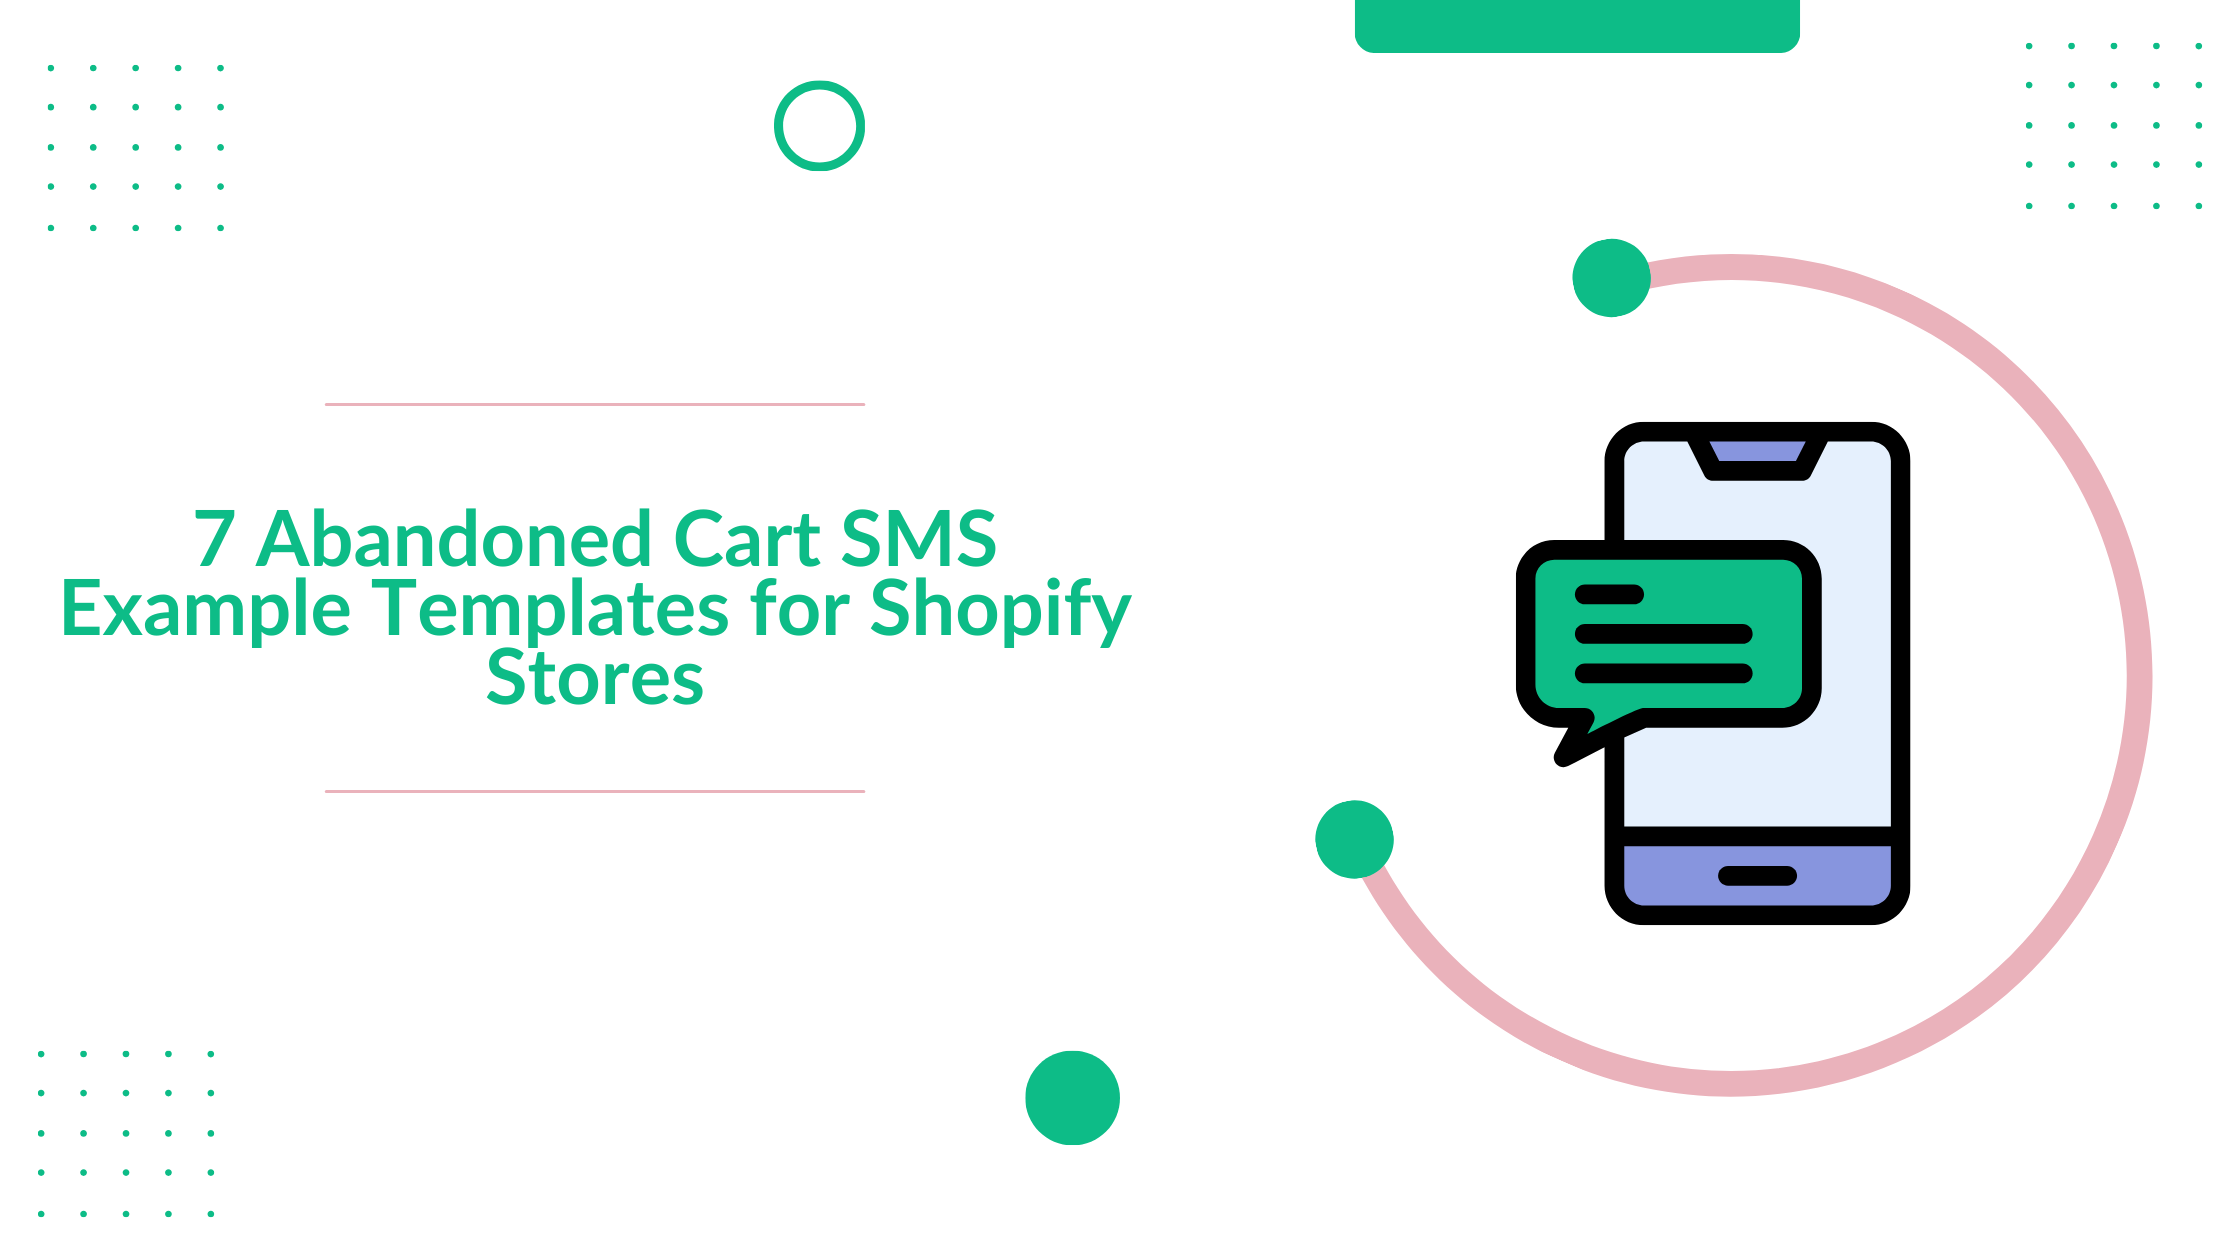 Learn how to use SMS text messages to recover abandoned carts and increase revenue for your Shopify store. Check out these free abandoned cart SMS examples to get started!